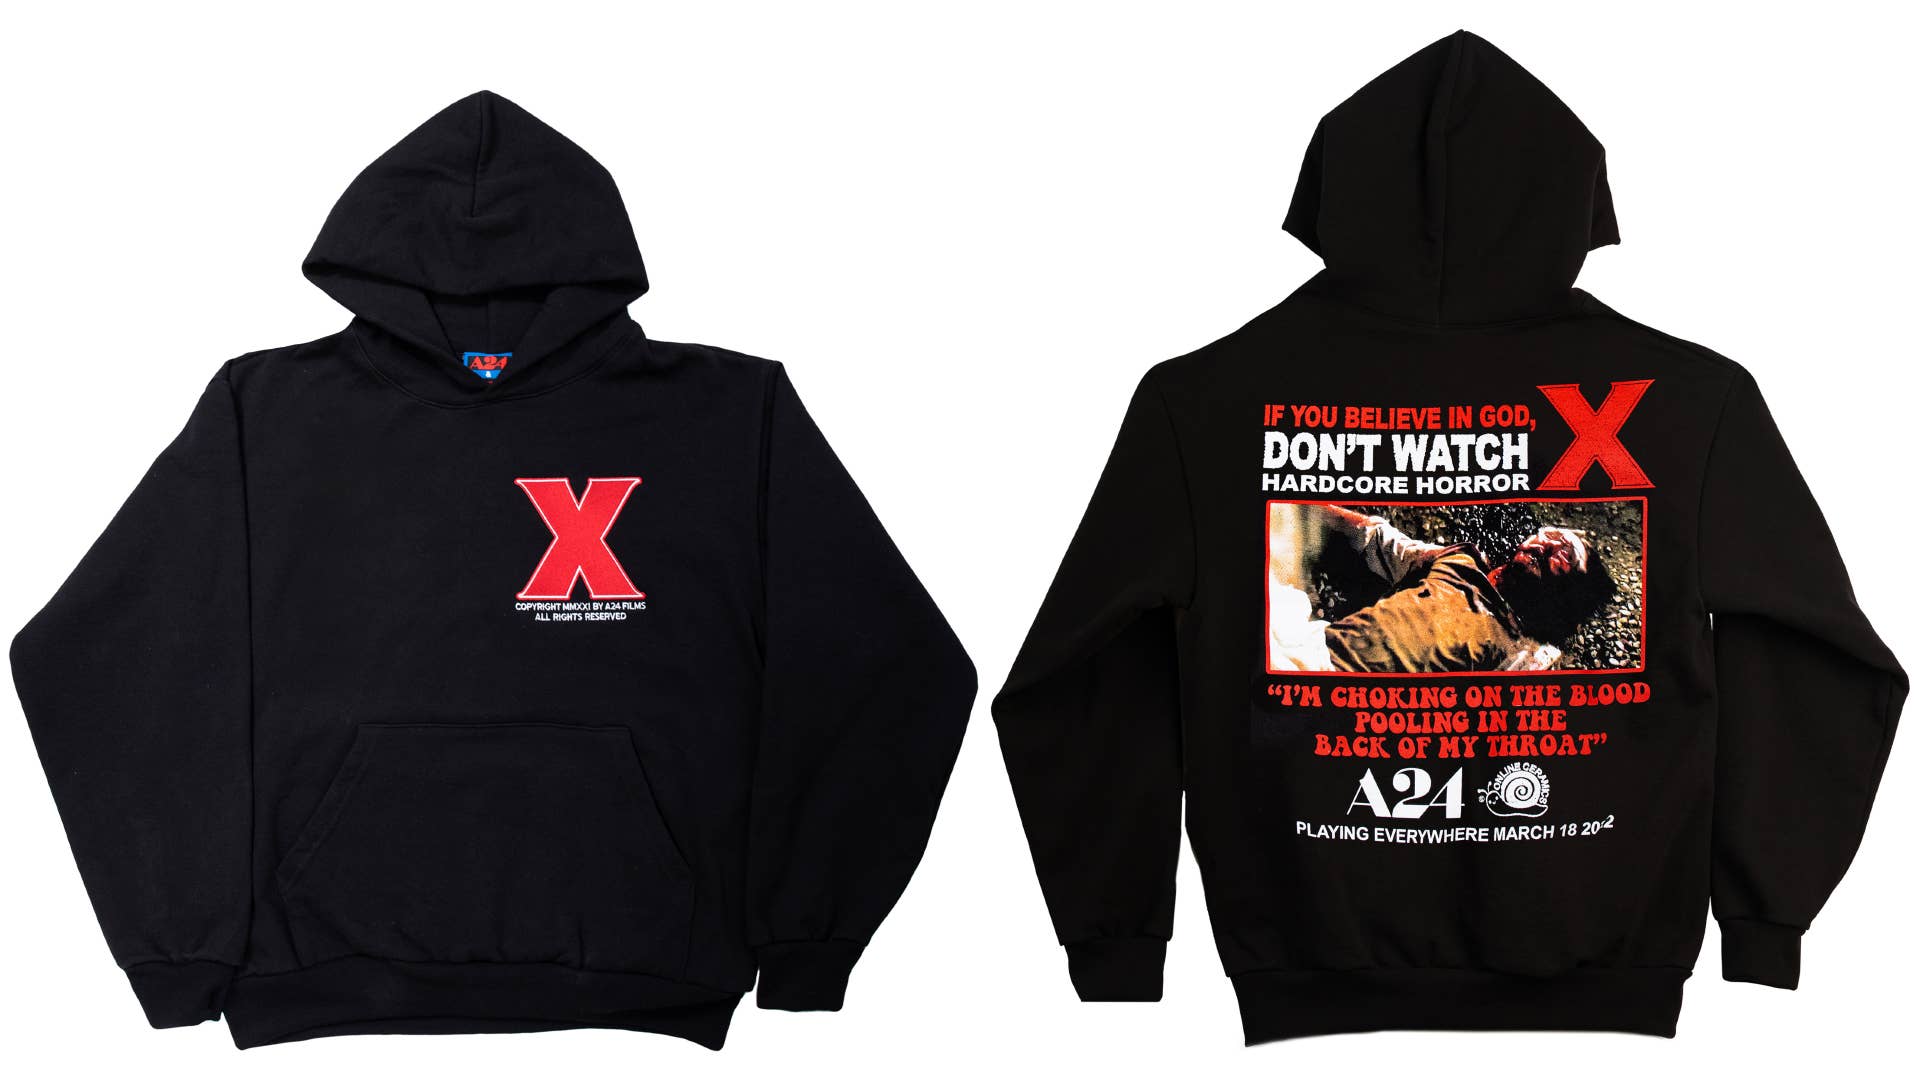 Online Ceramics hoodies in celebration of a new horror movie are shown